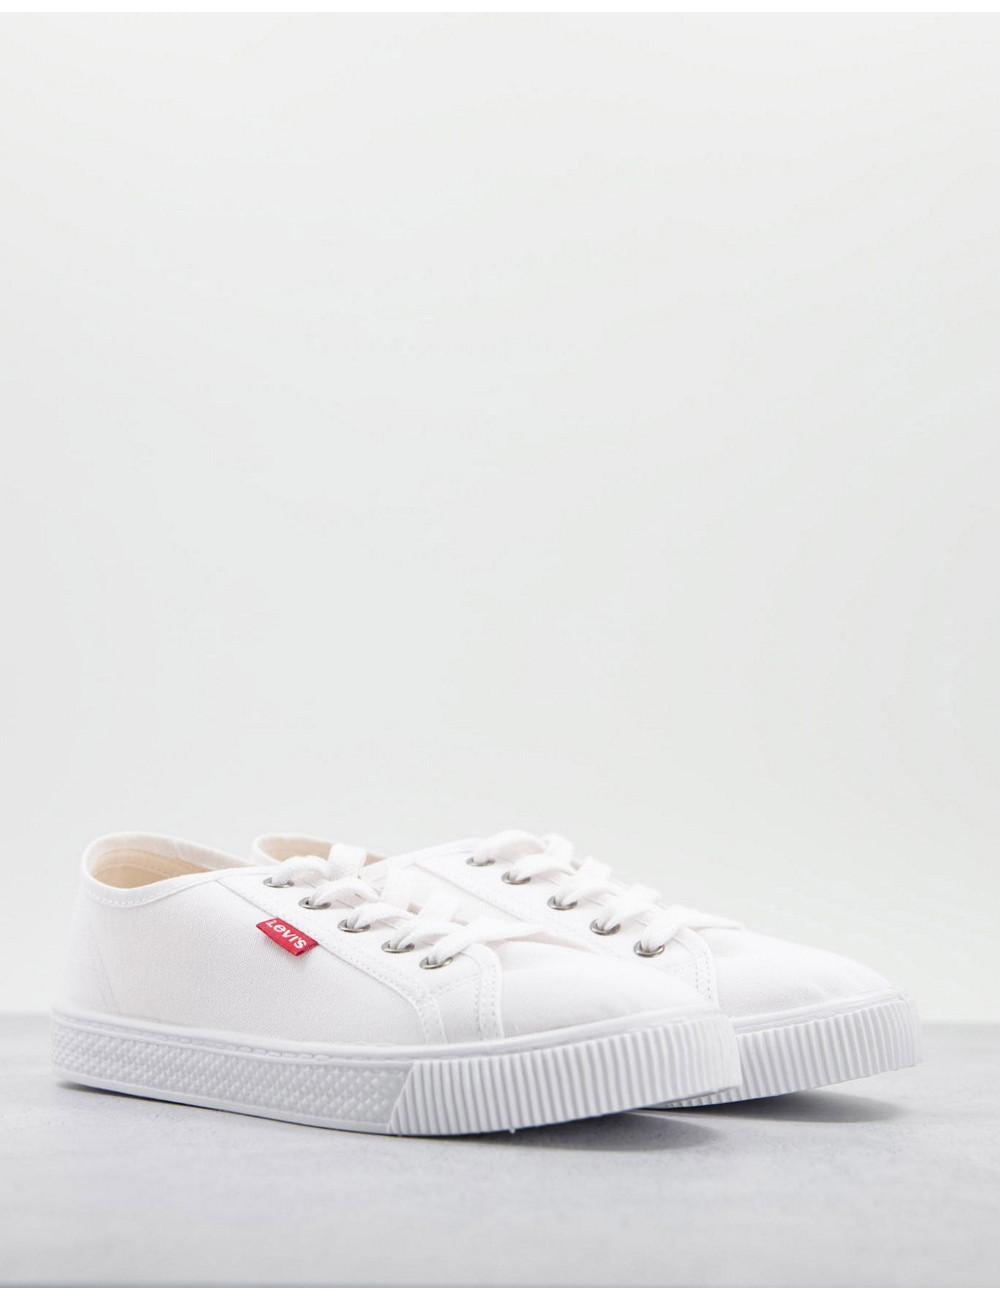 Levi's canvas shoe with red...